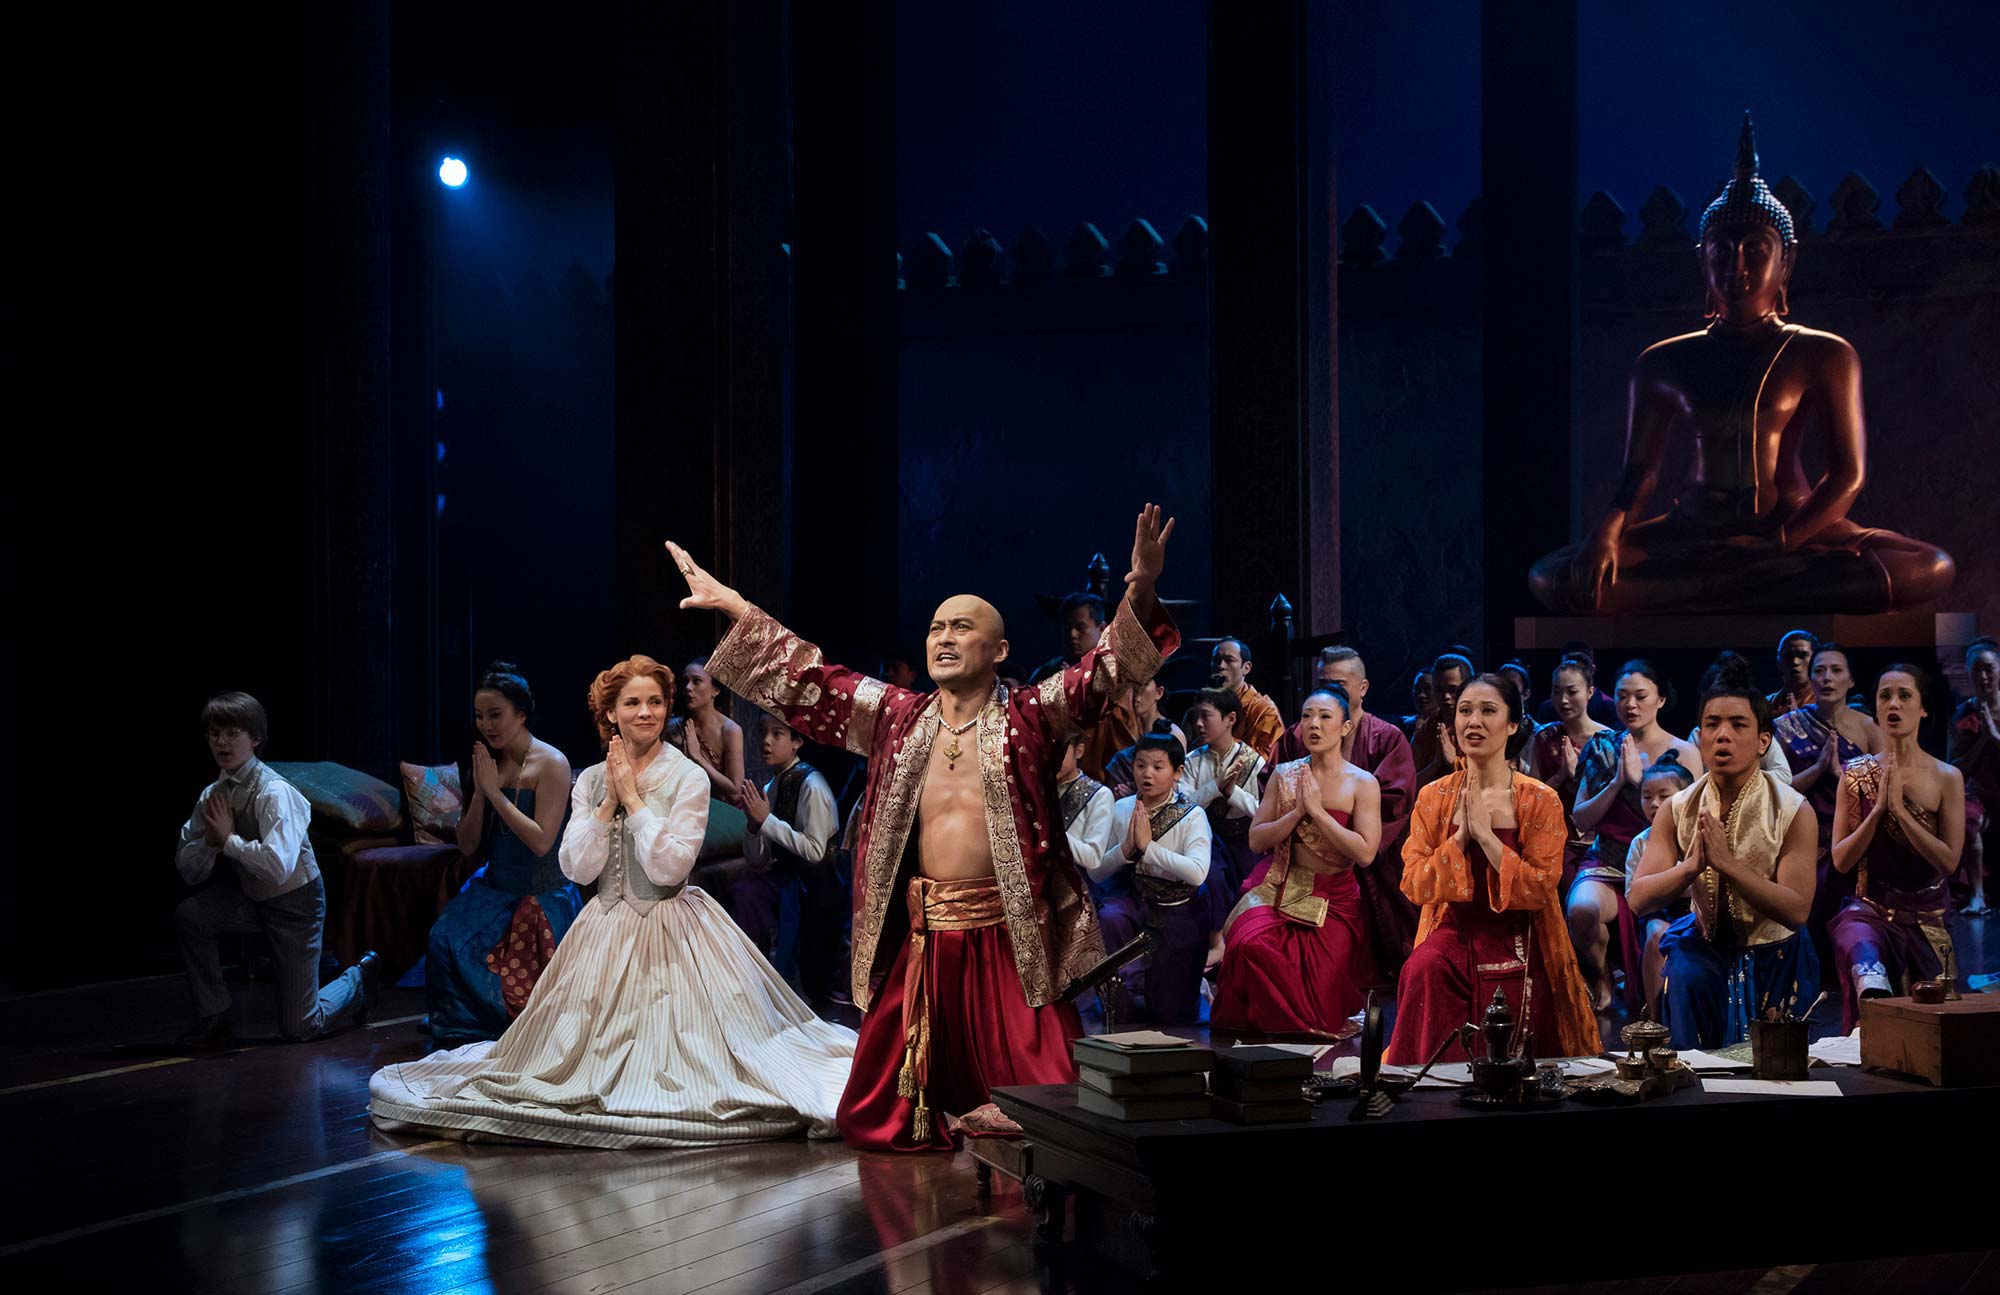 A photo from the 2015 Lincoln Center Theater production of The King and I.